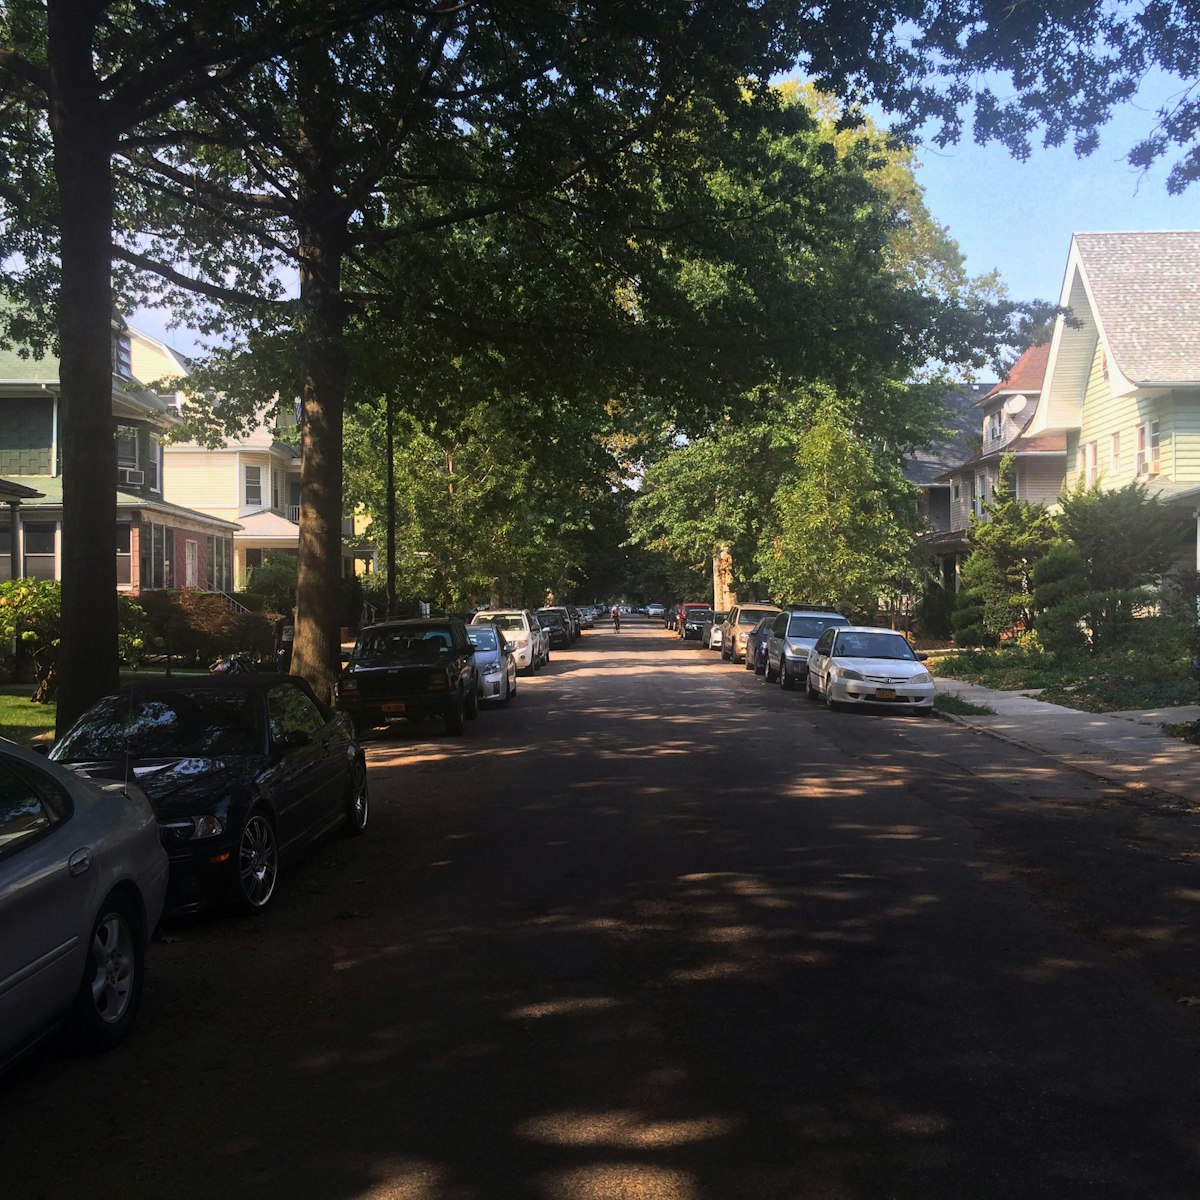 A view down the street in Ditmas Park.